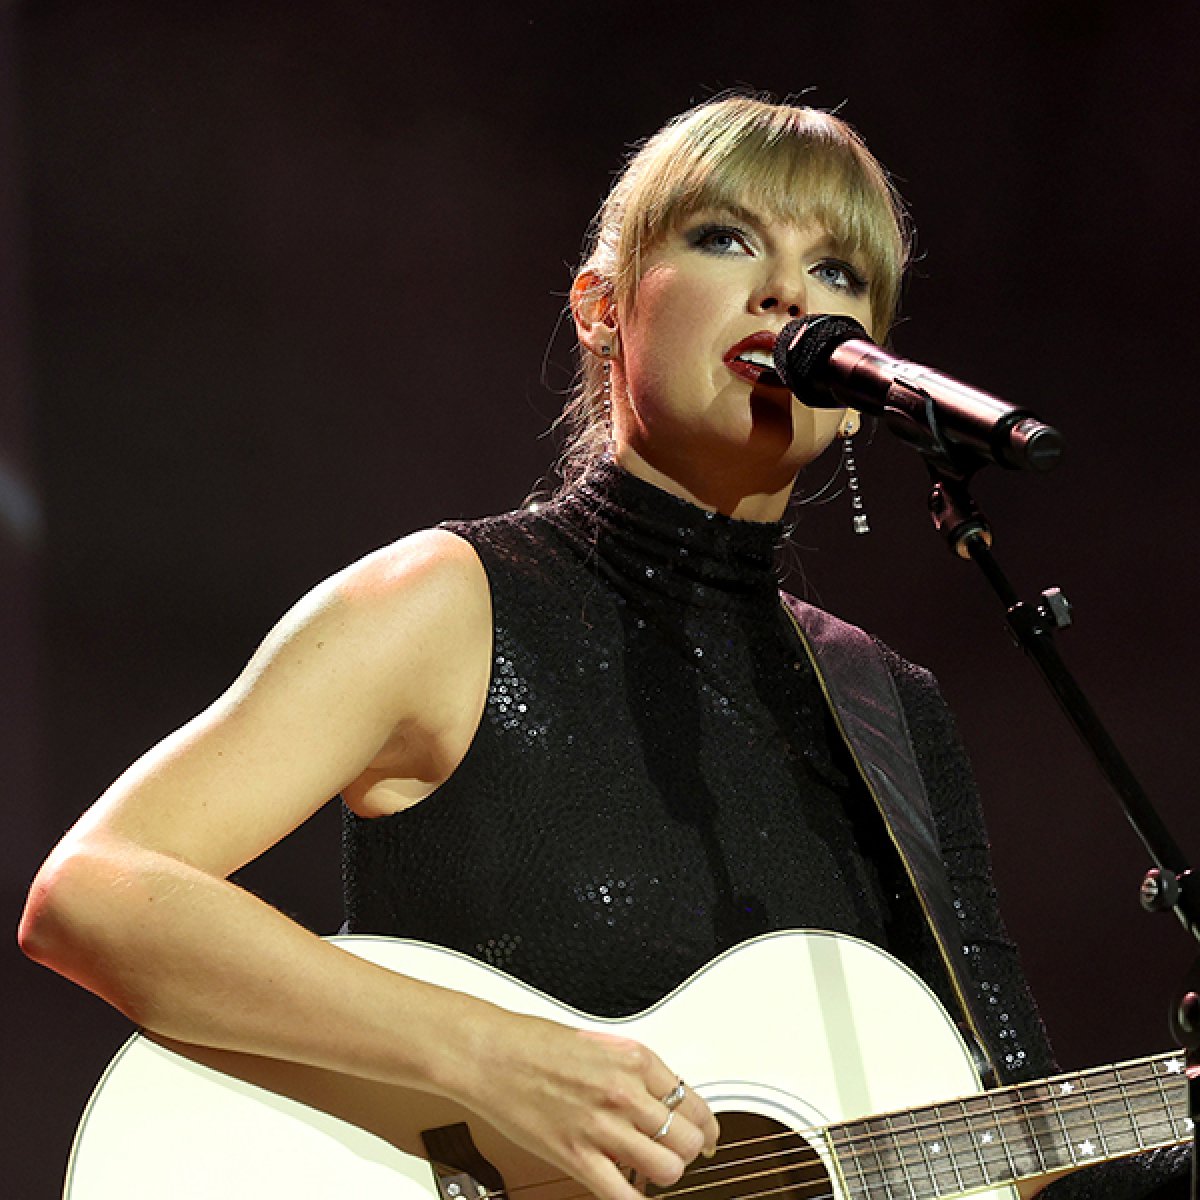 Taylor Swift has problems with merch delays and quality